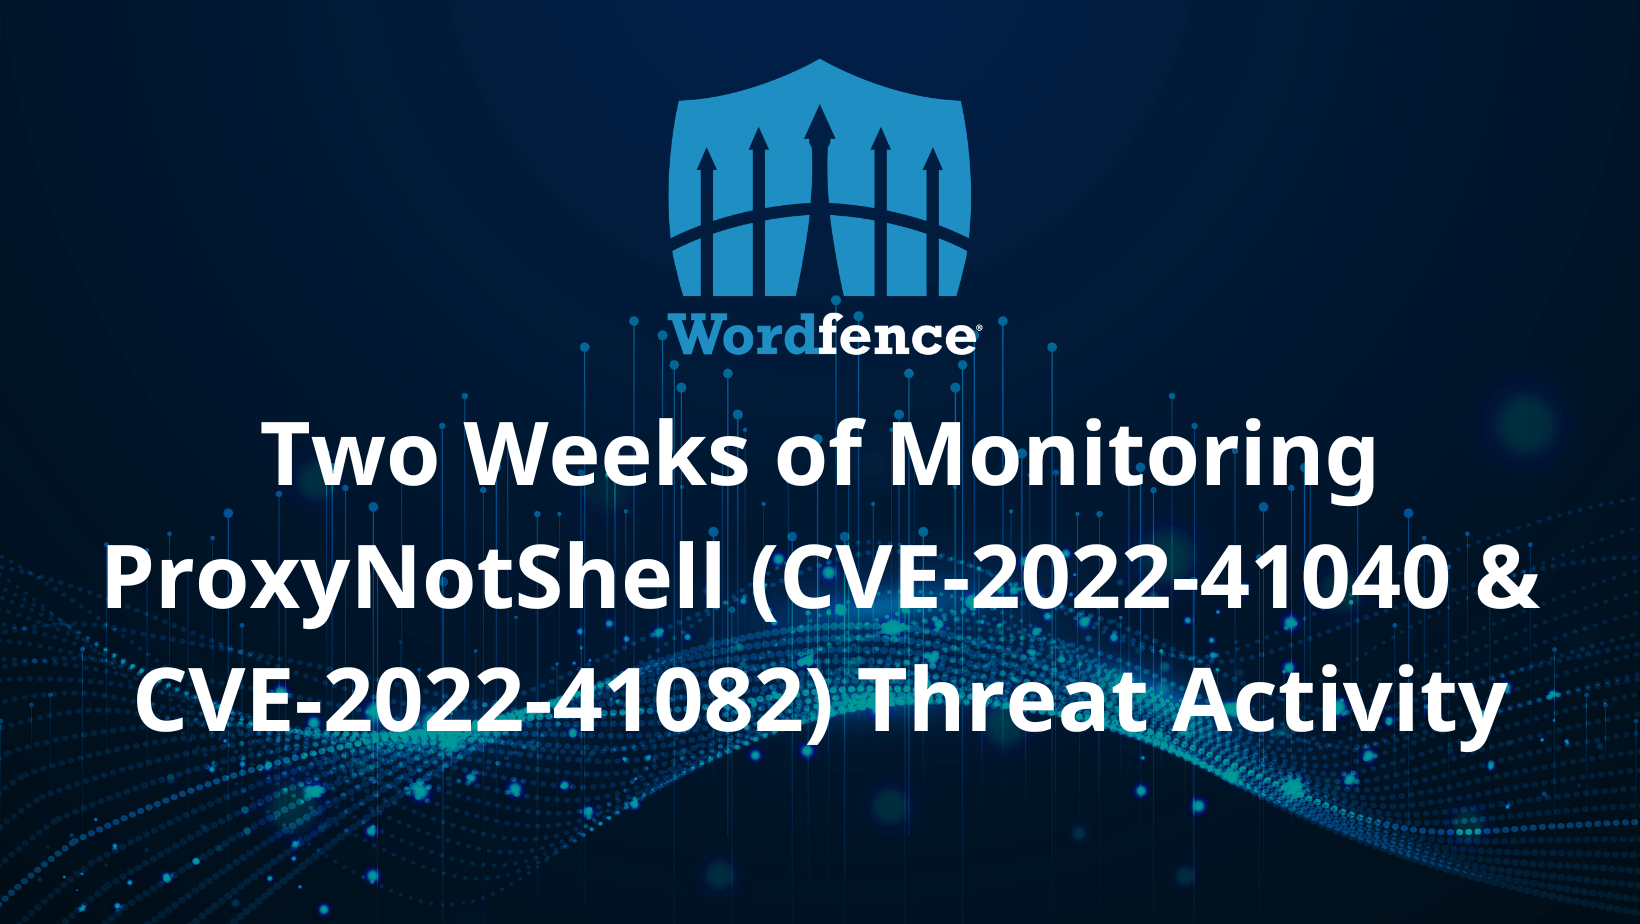 Two Weeks of Monitoring ProxyNotShell Threat Activity